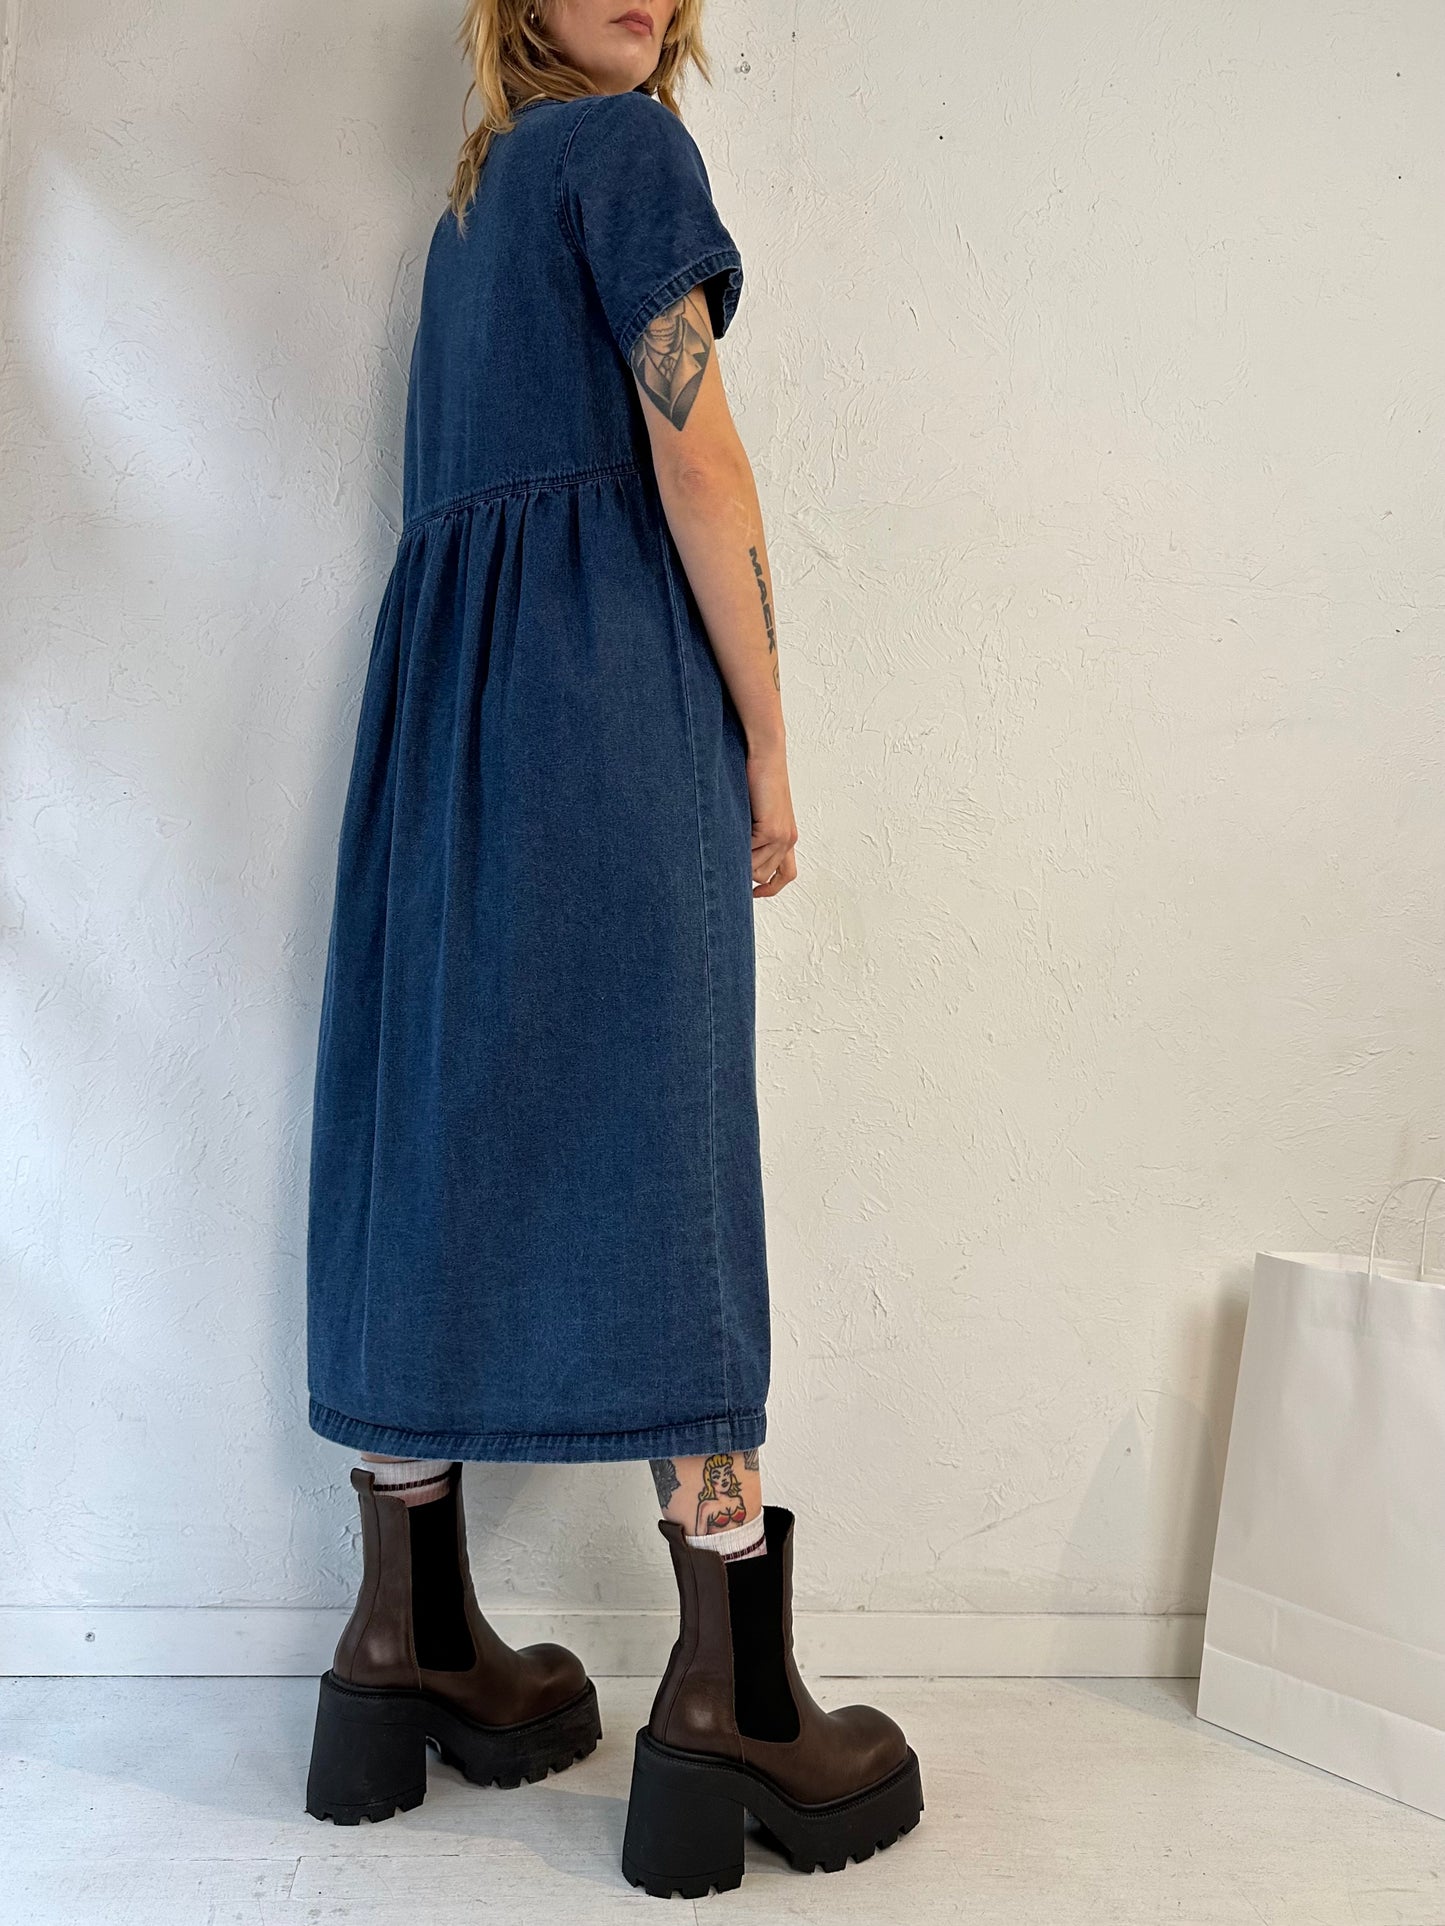 90s Embroidered Button Up Denim Dress / Small